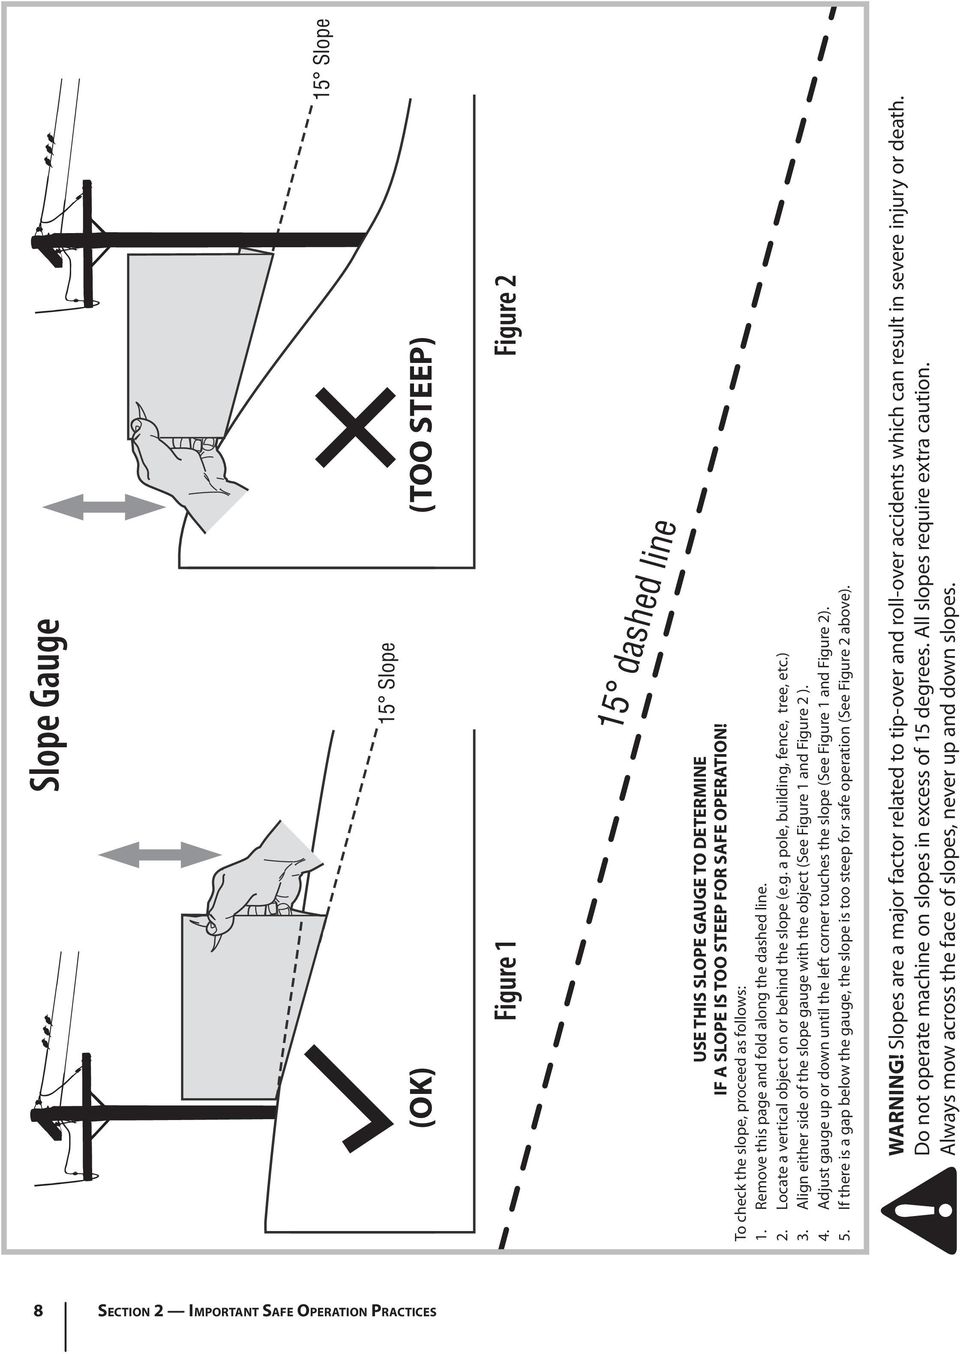 Align either side of the slope gauge with the object (See Figure 1 and Figure 2 ). 4. Adjust gauge up or down until the left corner touches the slope (See Figure 1 and Figure 2). 5.